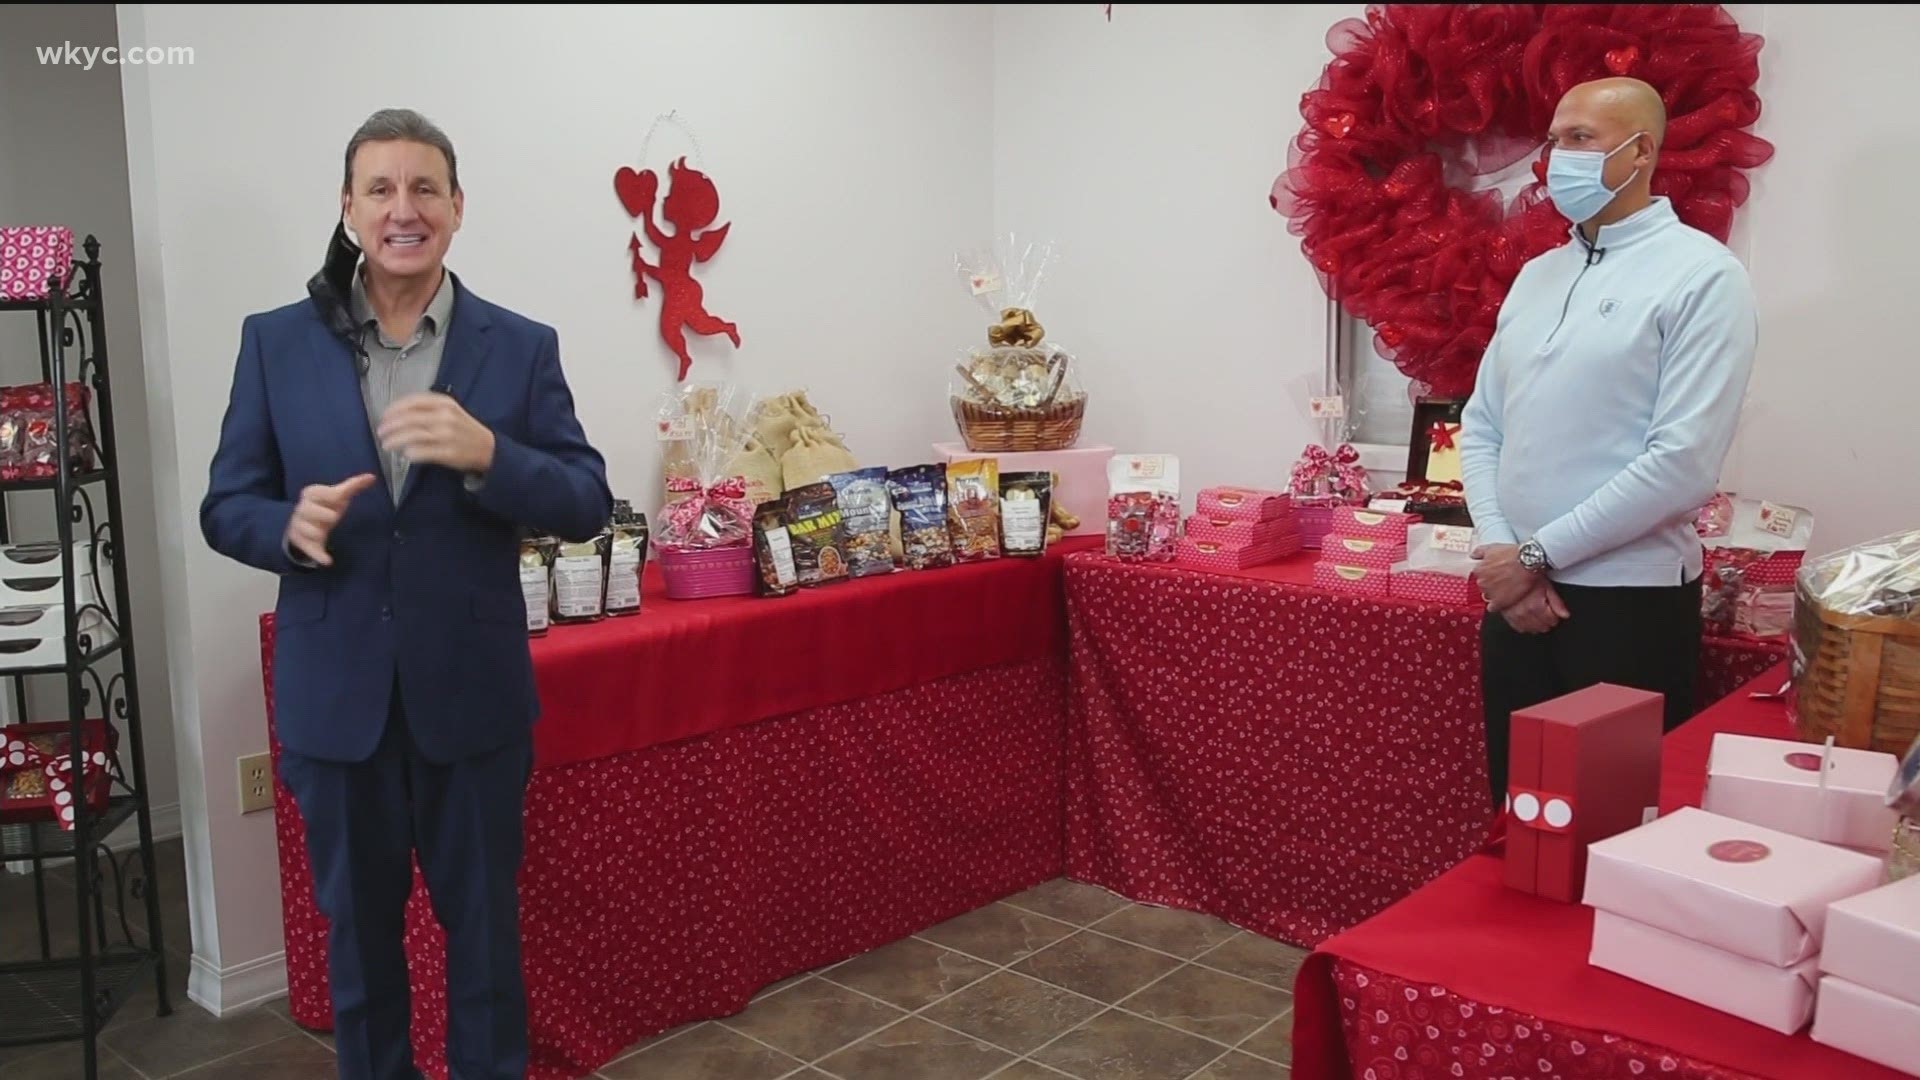 Joe talks with Matt Kanan from King Nut Companies to learn about their long history here in Cleveland and celebrating Valentine's Day with them!